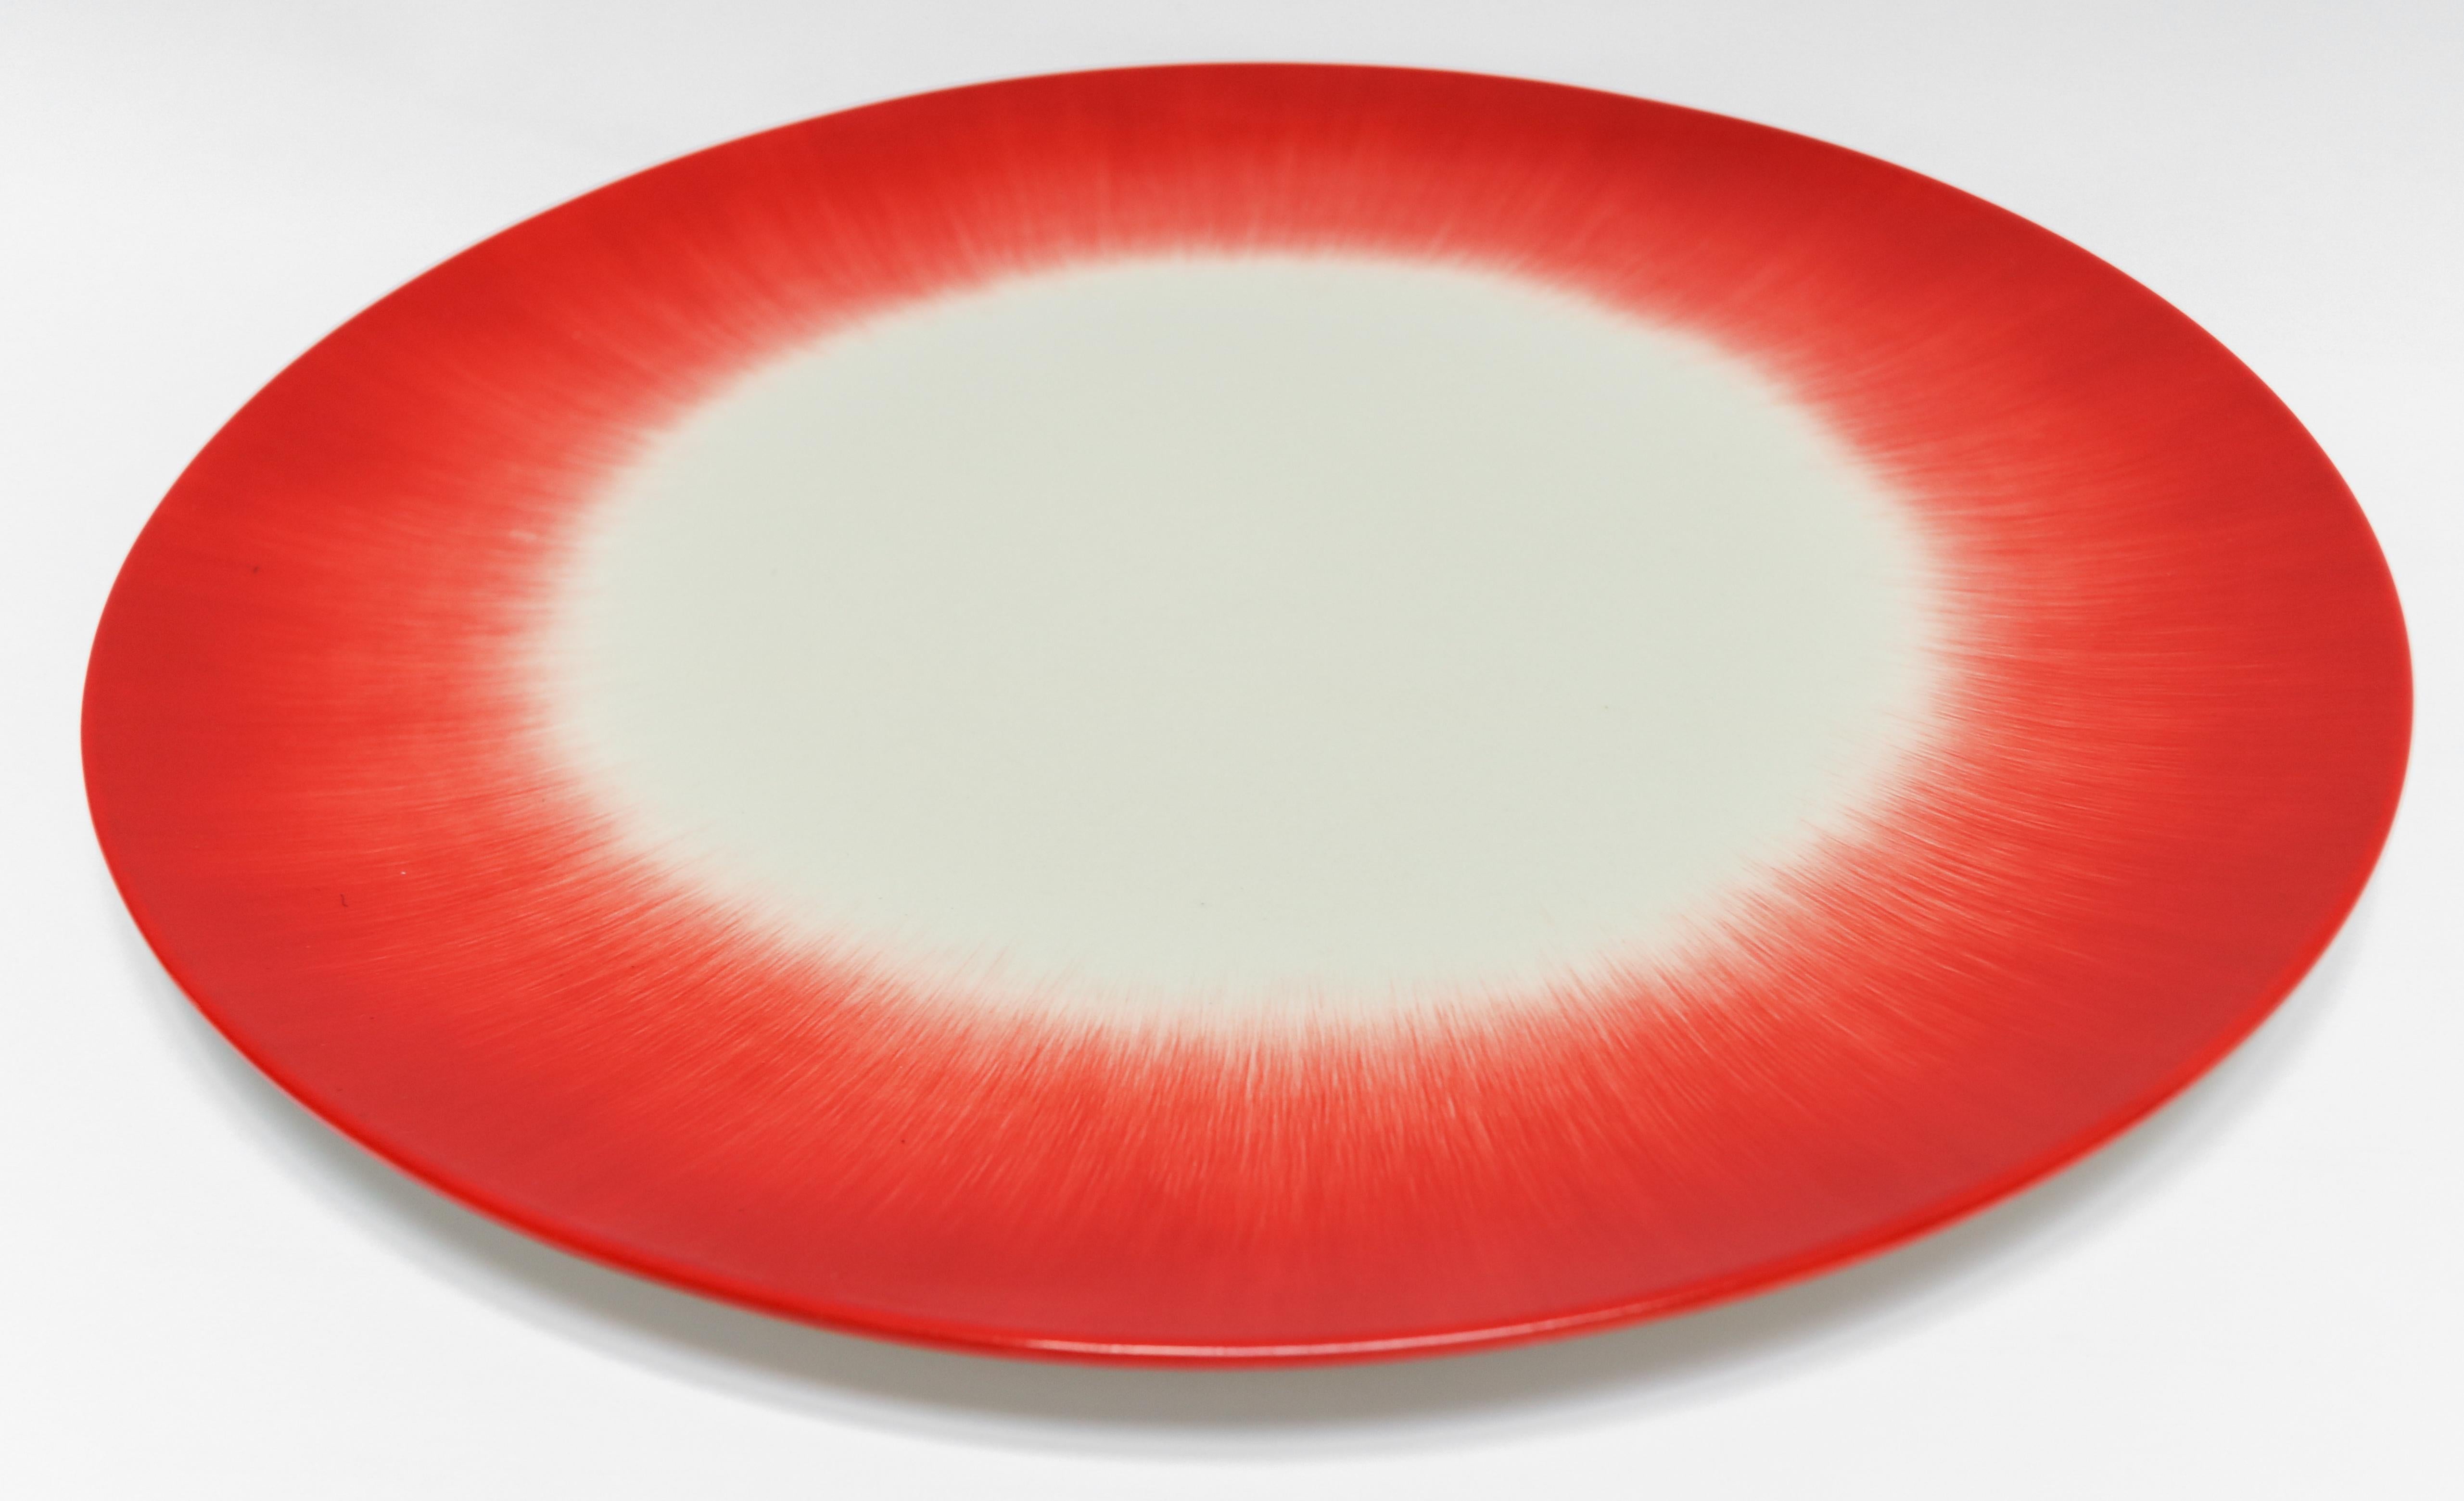 Contemporary Ann Demeulemeester for Serax Dé Dinner Plate in Off White / Red